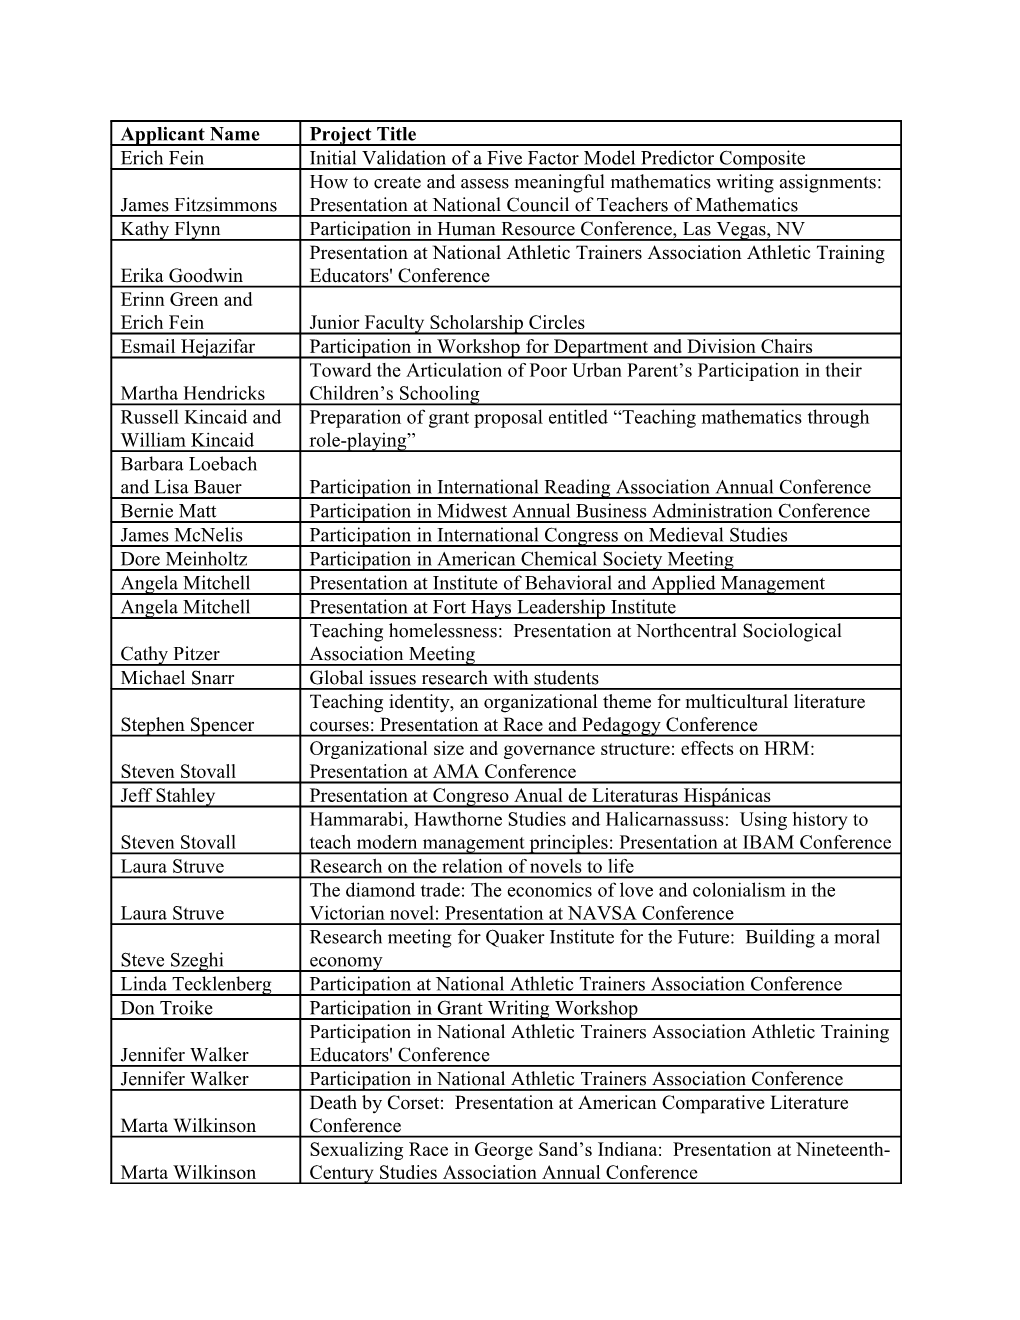 Congratulations to the Recipients of the Thirdround of IDRC Mini-Grants in 2006-2007!